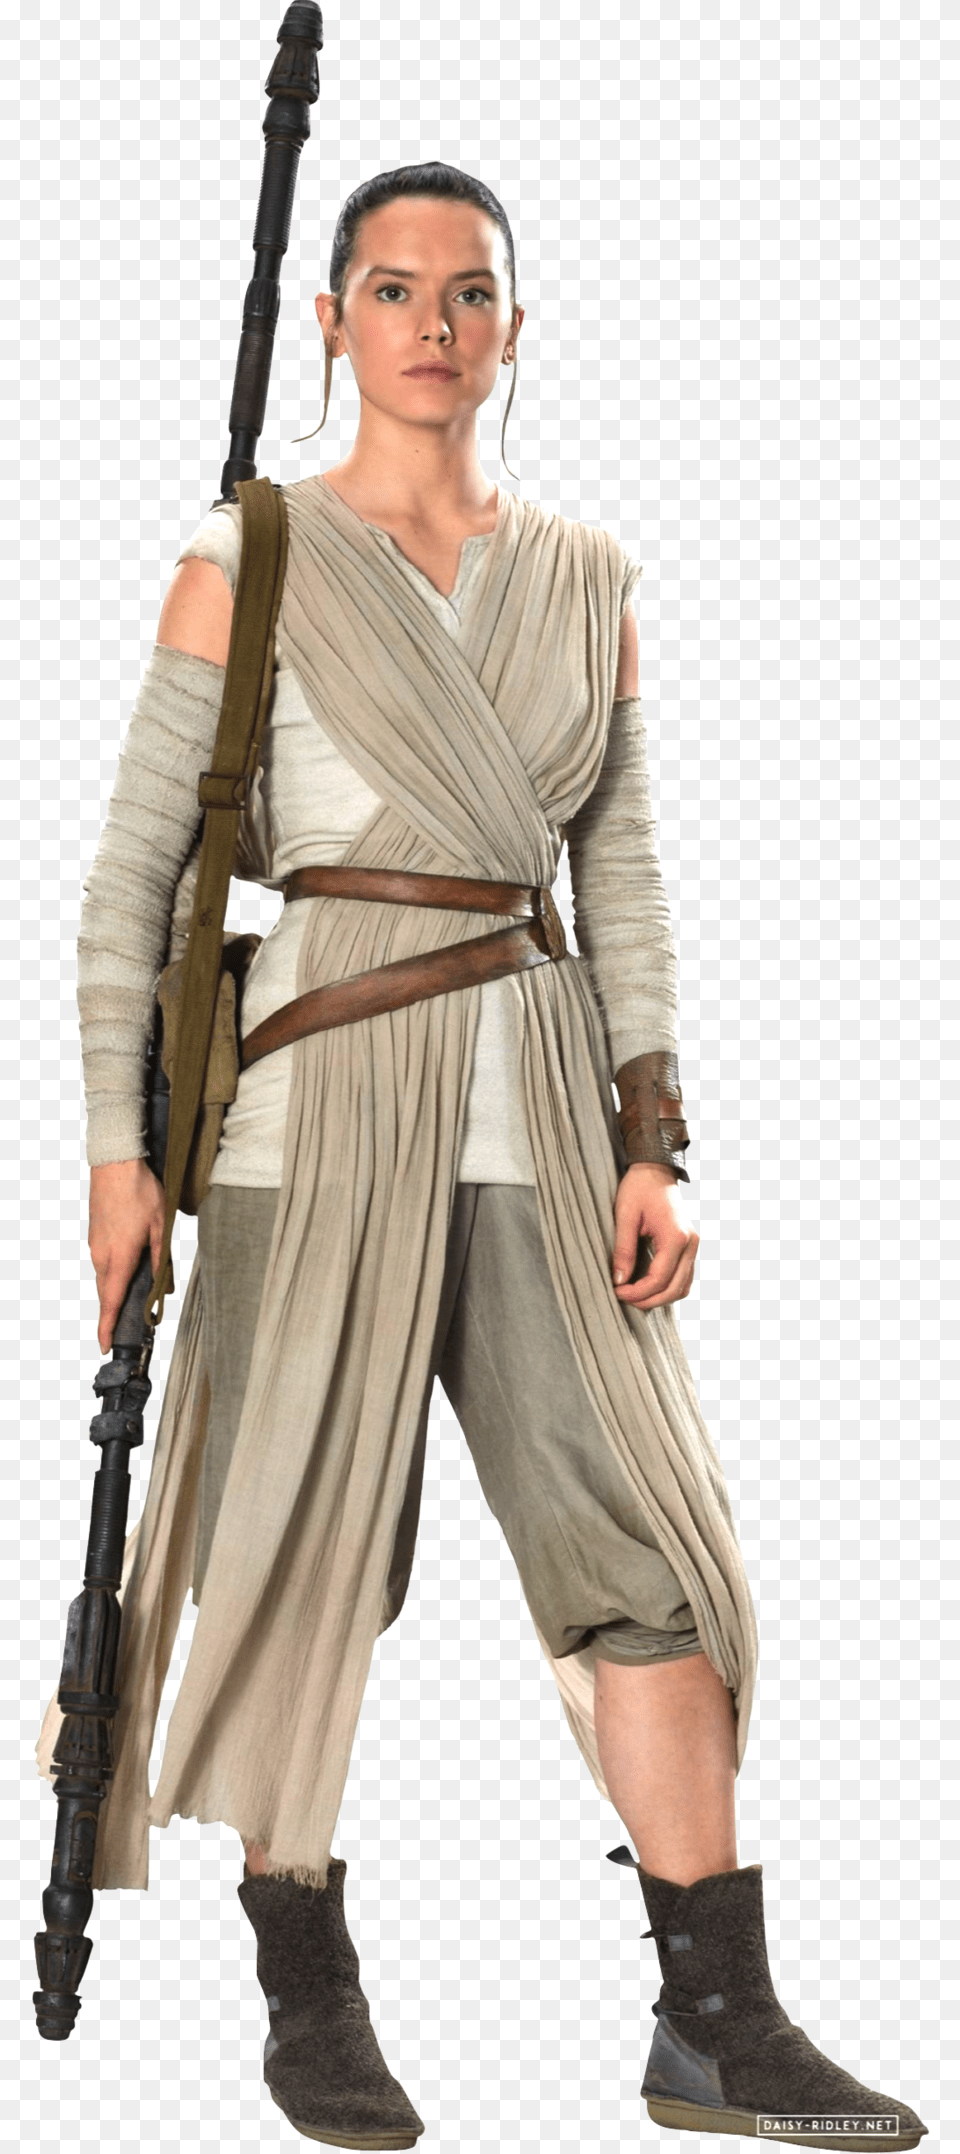 Star Wars Vii Rey 2 By Rey De Star Wars, Clothing, Costume, Person, Weapon Free Transparent Png